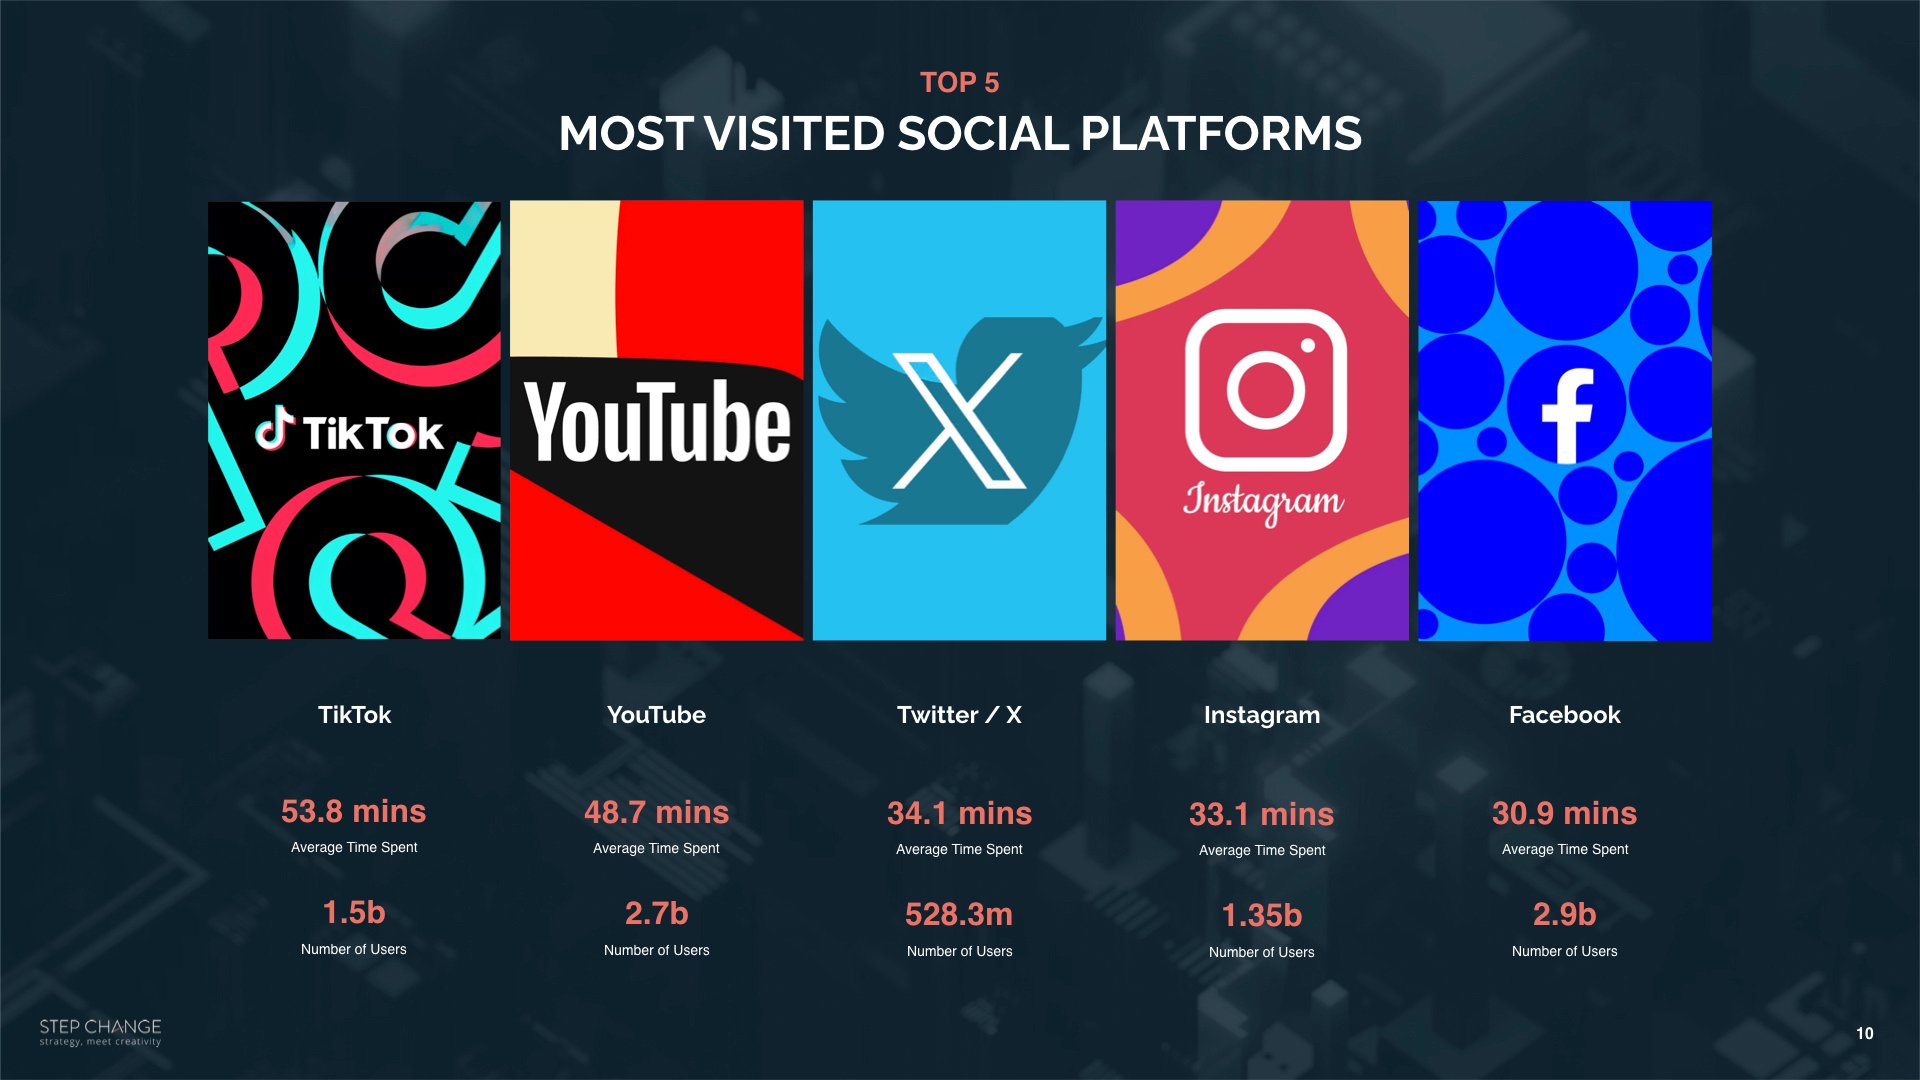 SC Top 5 Digital Powerplays on a Page